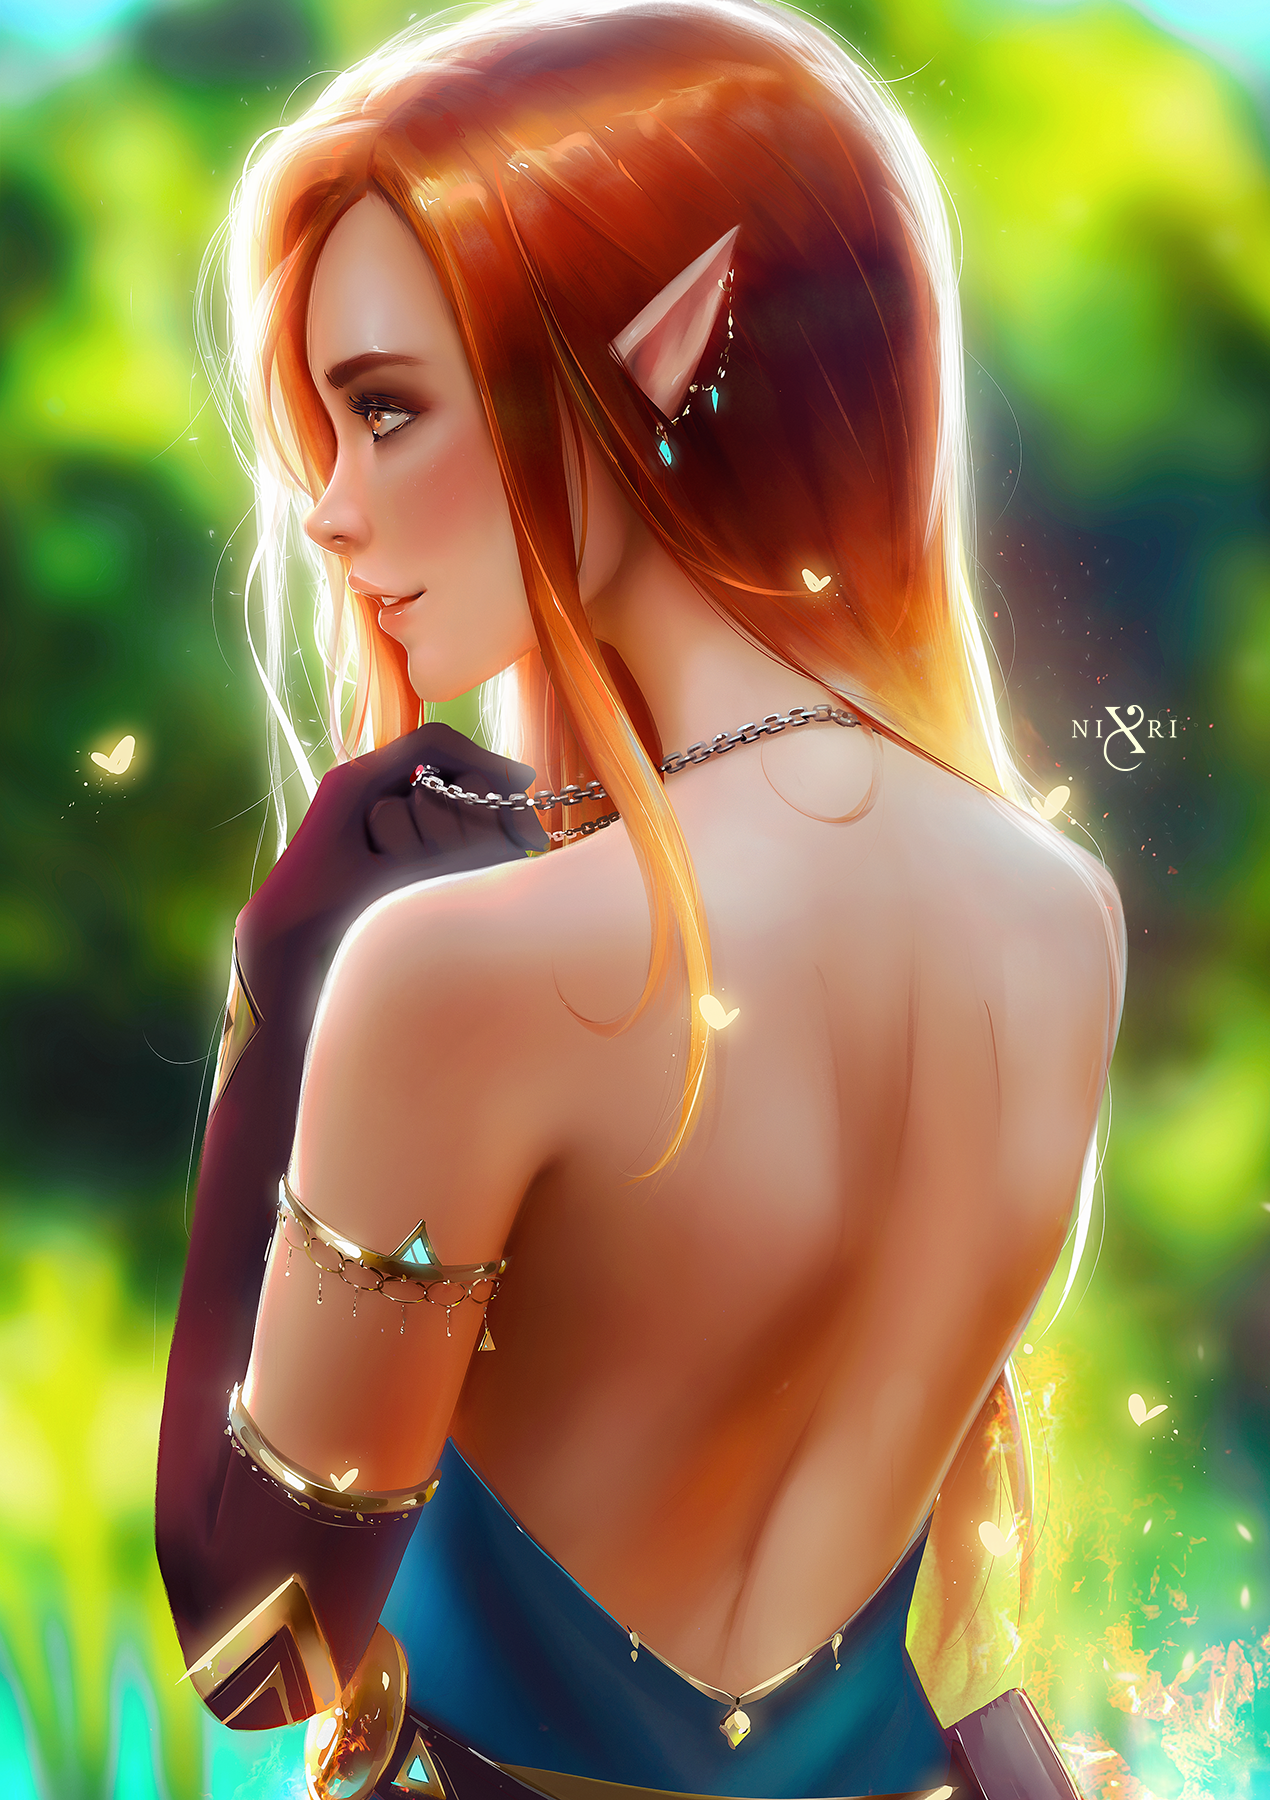 General 1270x1800 Nixri drawing women elves redhead pointy ears smiling looking away dress bare shoulders elbow gloves bright butterfly fantasy art jewelry